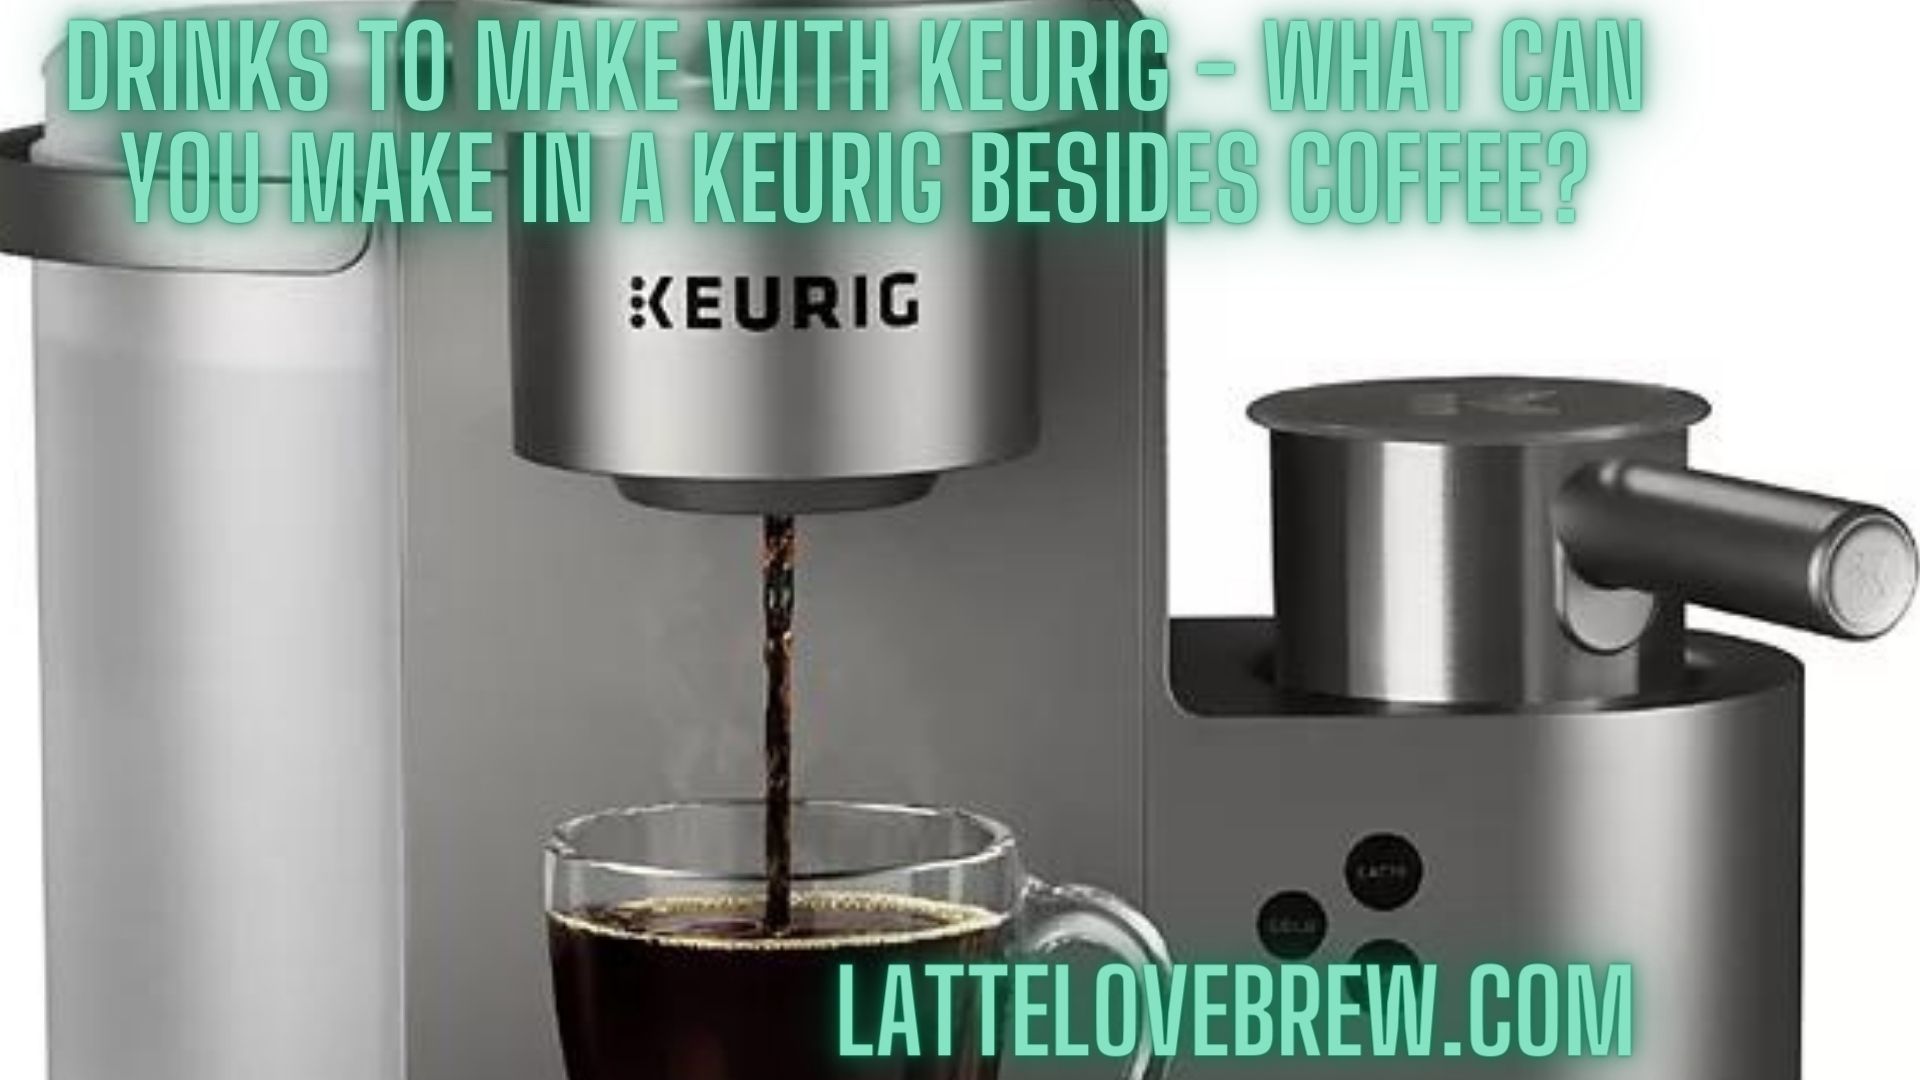 https://lattelovebrew.com/wp-content/uploads/2022/09/Drinks-To-Make-With-Keurig-What-Can-You-Make-In-A-Keurig-Besides-Coffee.jpg